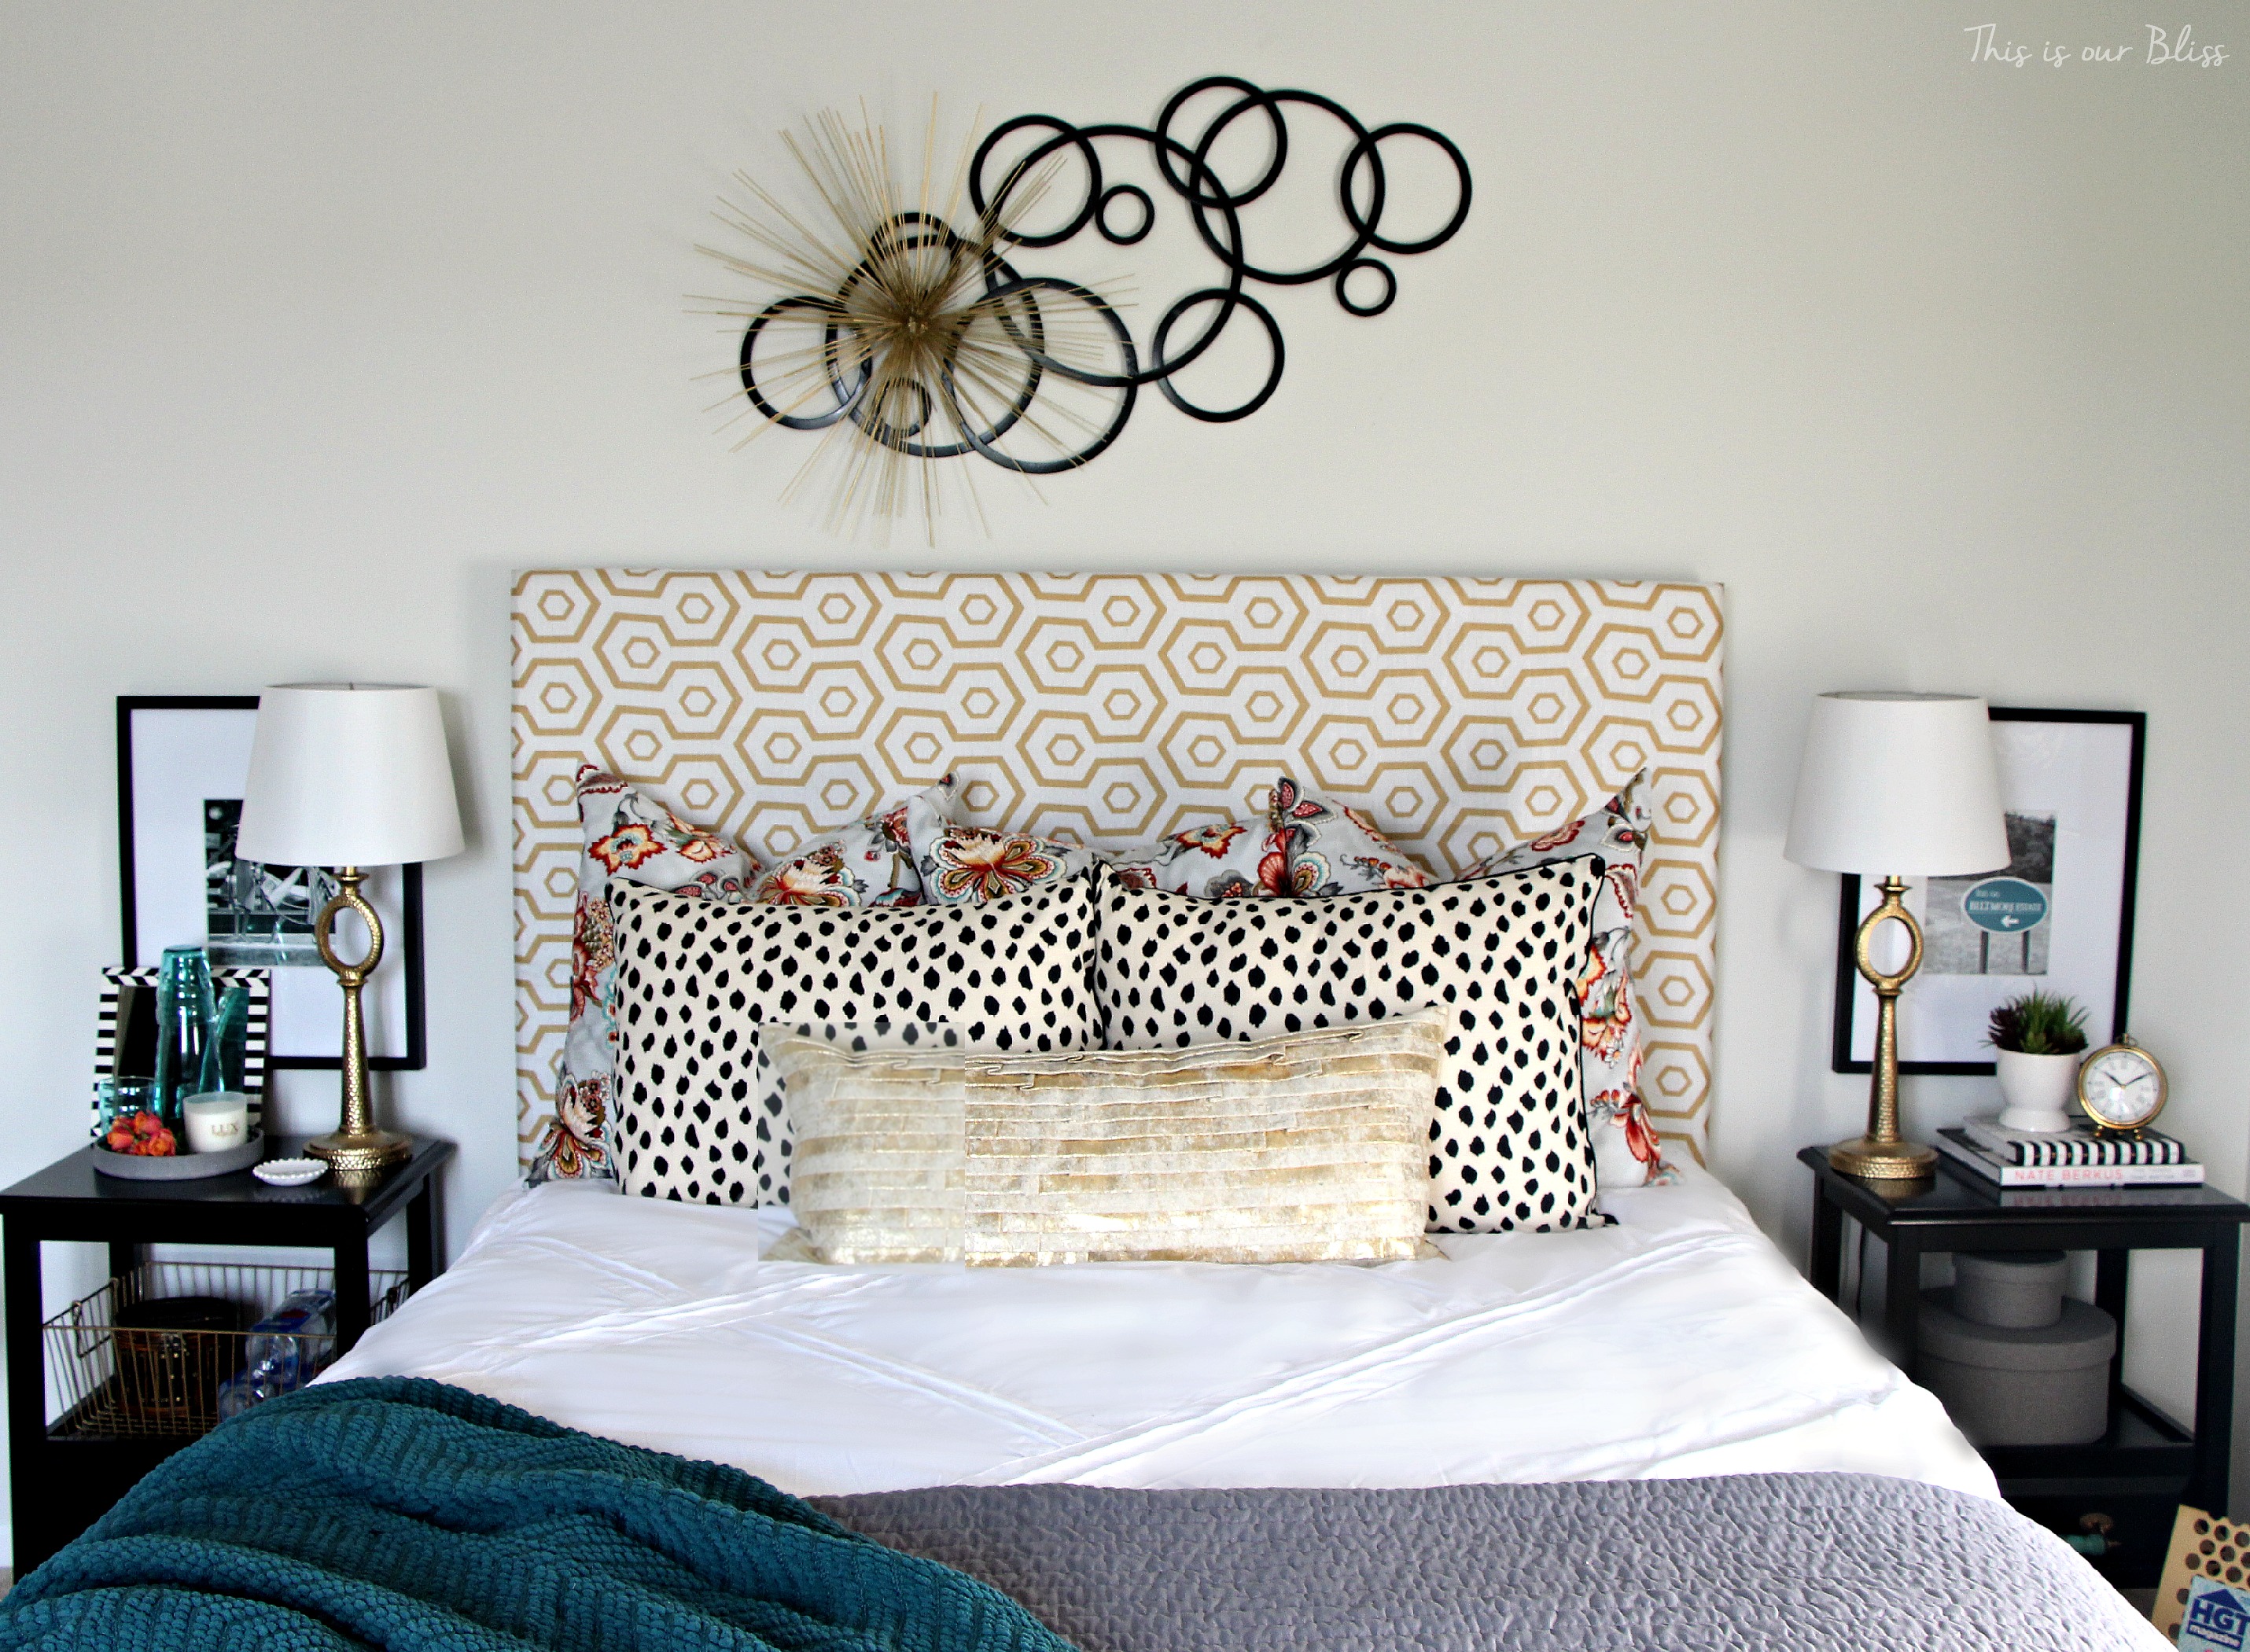 guestroom revamp - pattern play bed - floral geometric - This is our Bliss